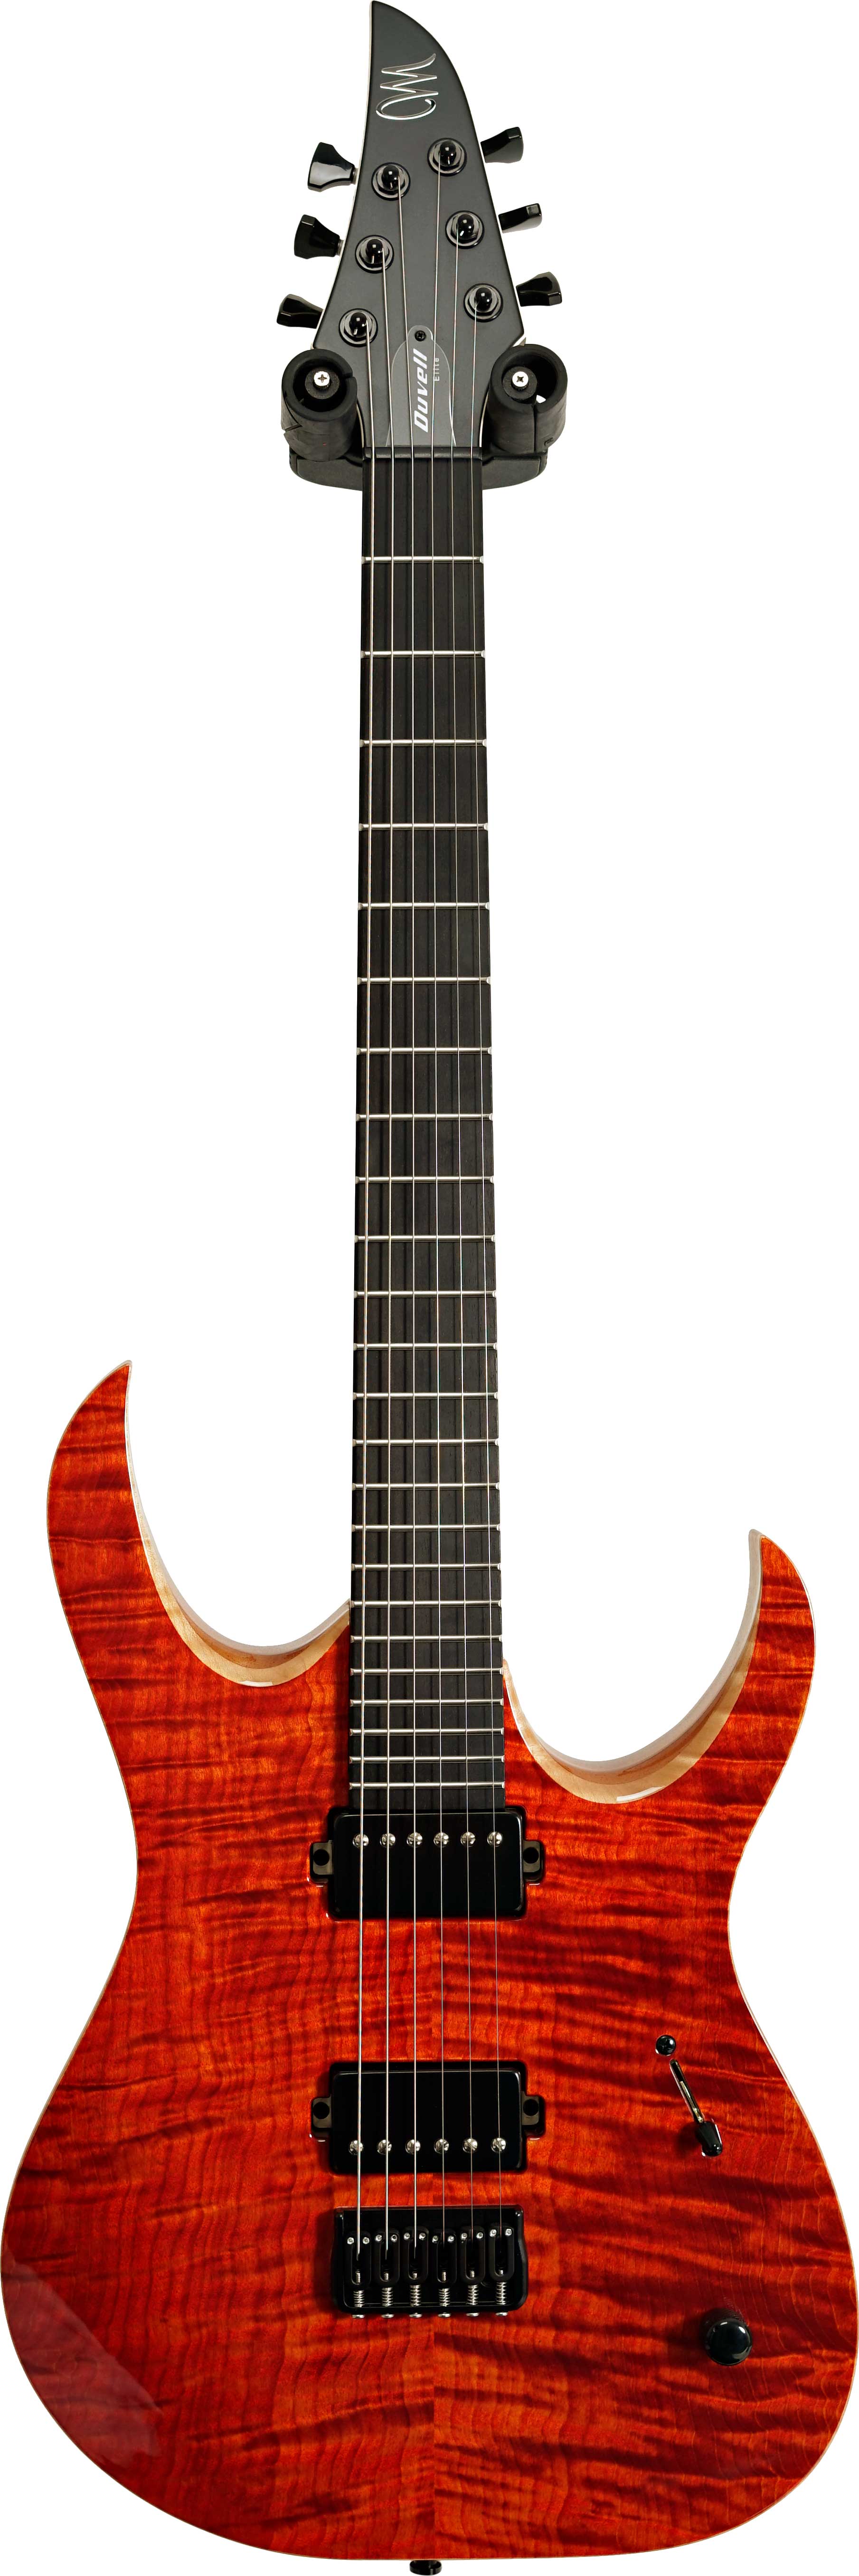 Mayones Duvell 6 Elite 4A Trans Orange Quilted Maple Top 